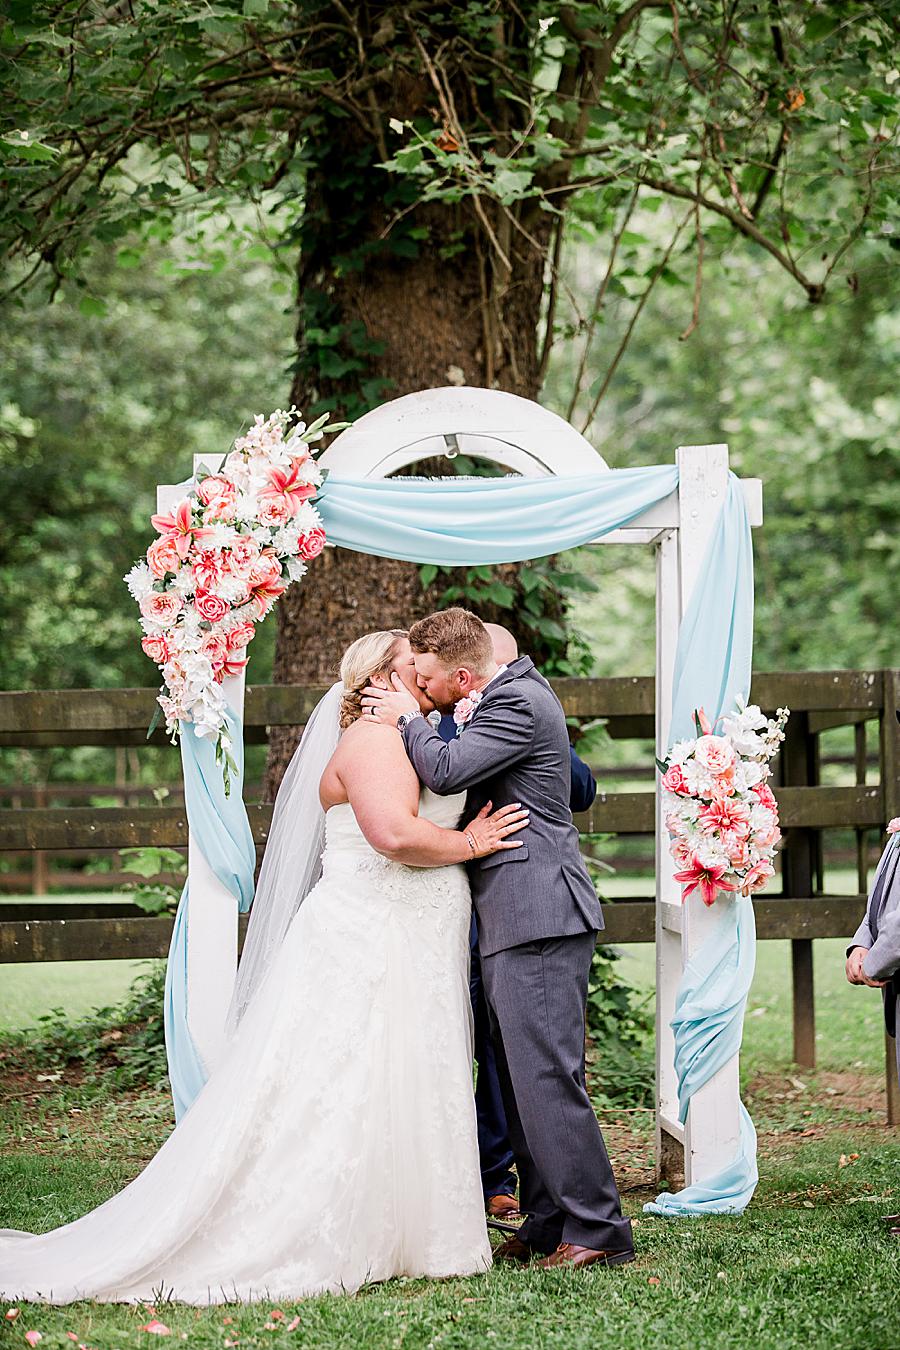 Wedding arch at this Strawberry Creek Wedding by Knoxville Wedding Photographer, Amanda May Photos.